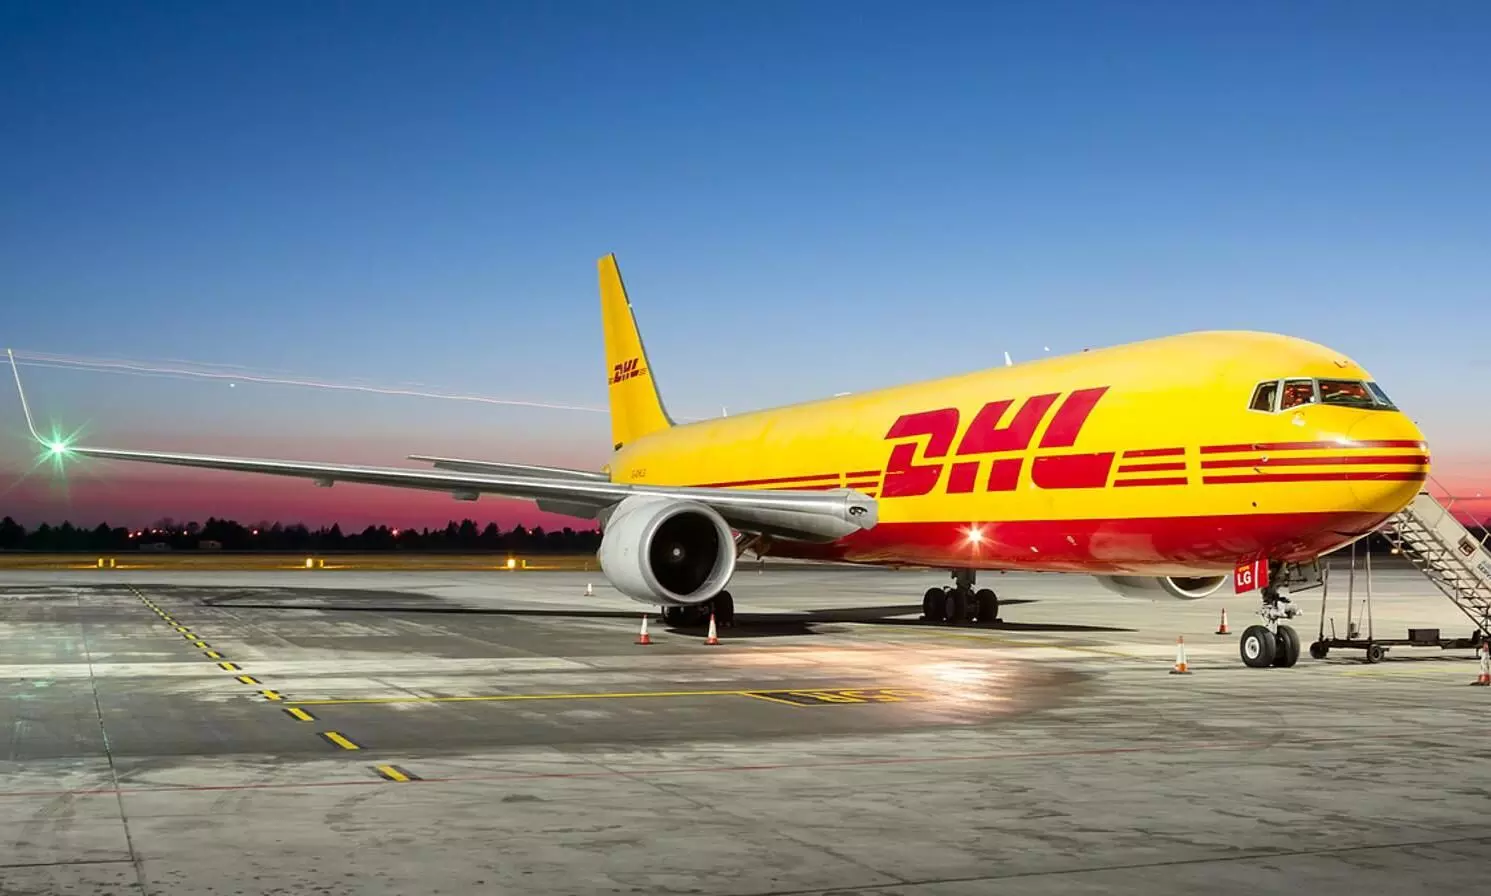 ATSG leases a Boeing 767-300 freighter aircraft to DHL